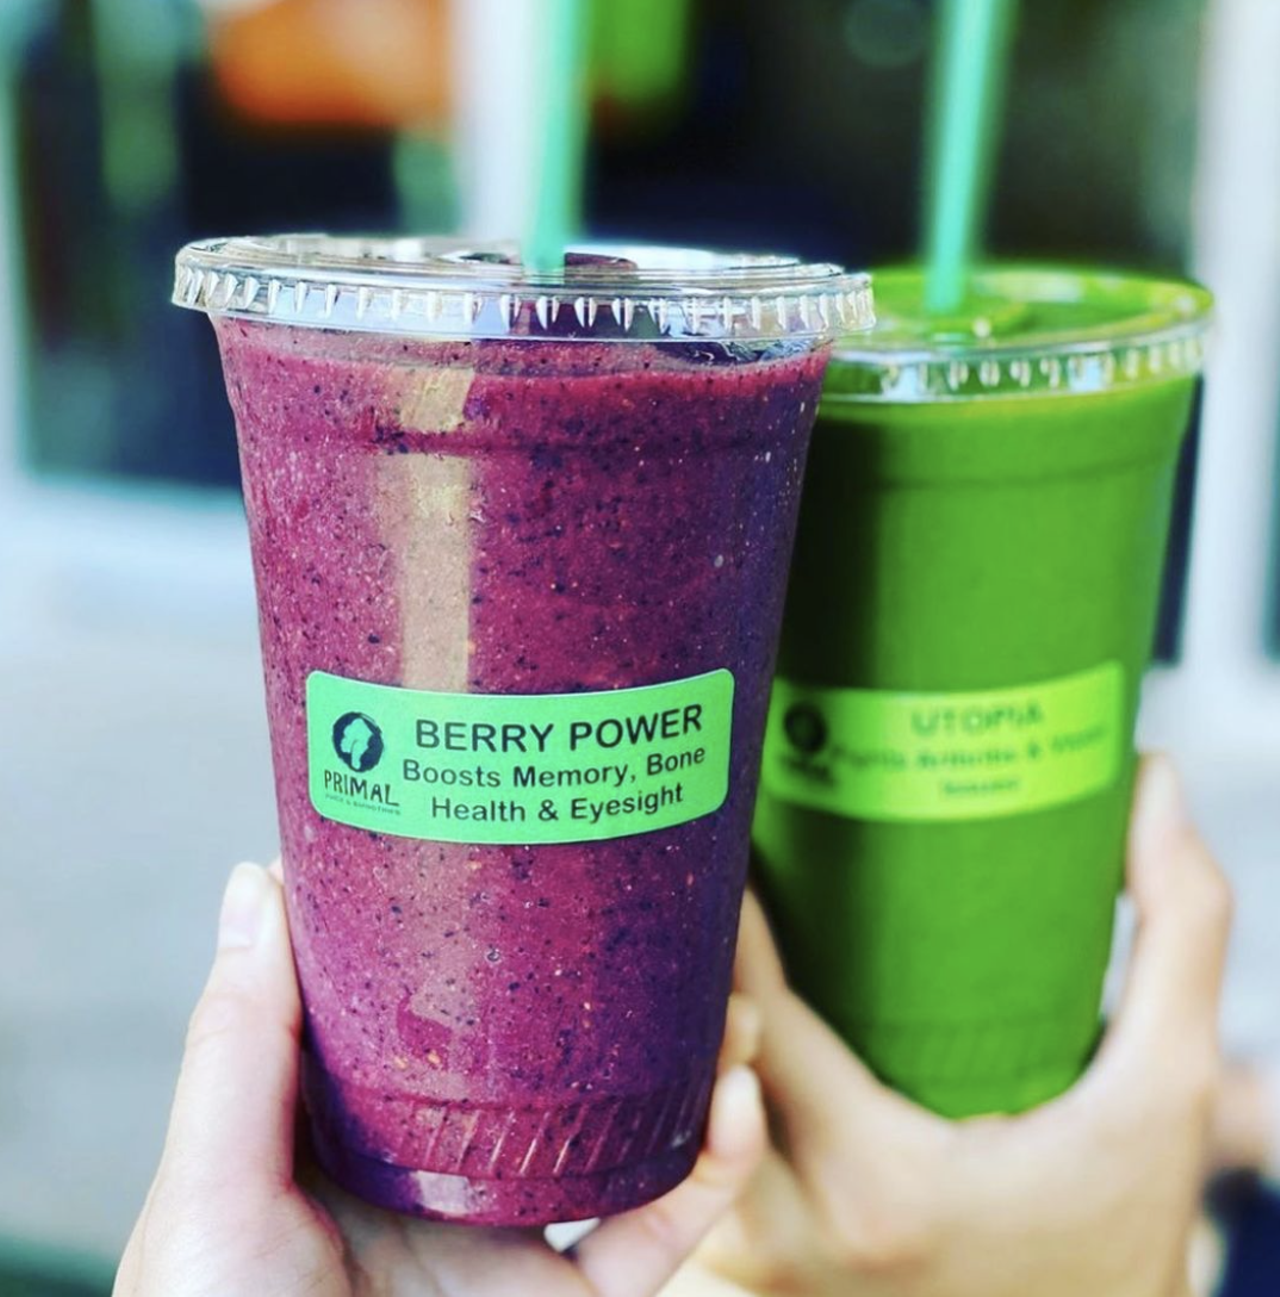 Primal Juice & Smoothies
Multiple Locations, myprimaljuice.com
Sporting a carefully crafted juice combo menu, Primal makes it simple to stick to your goals this year. They even offer dessert blends to curb that sweet craving with fresh fruits. 
Photo via Instagram / Primaljuicesa